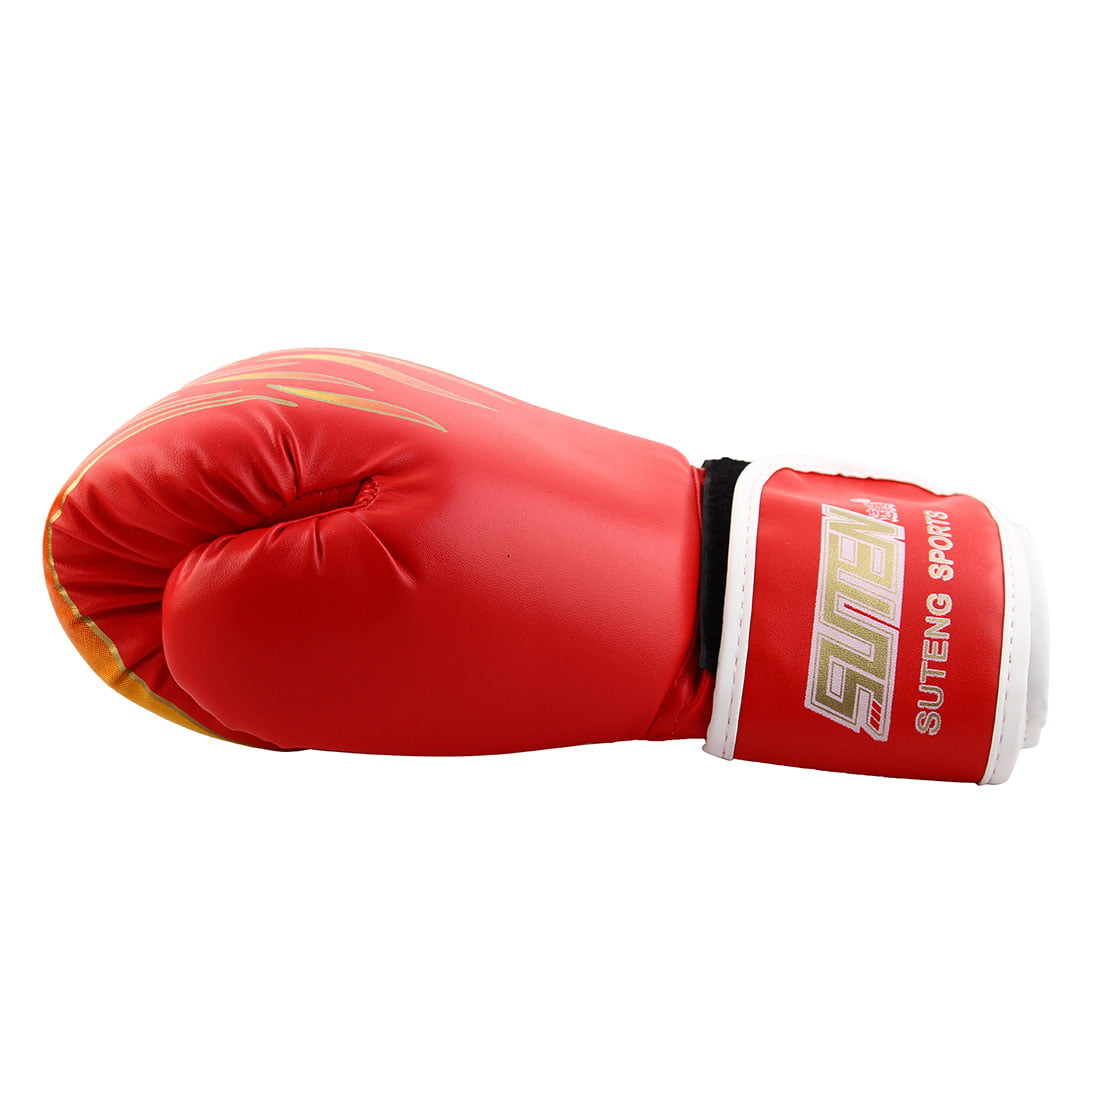 SUTENG Authorized Fire Print Sparring Punching Bag Mitts Boxing Gloves Red Pair | Walmart Canada